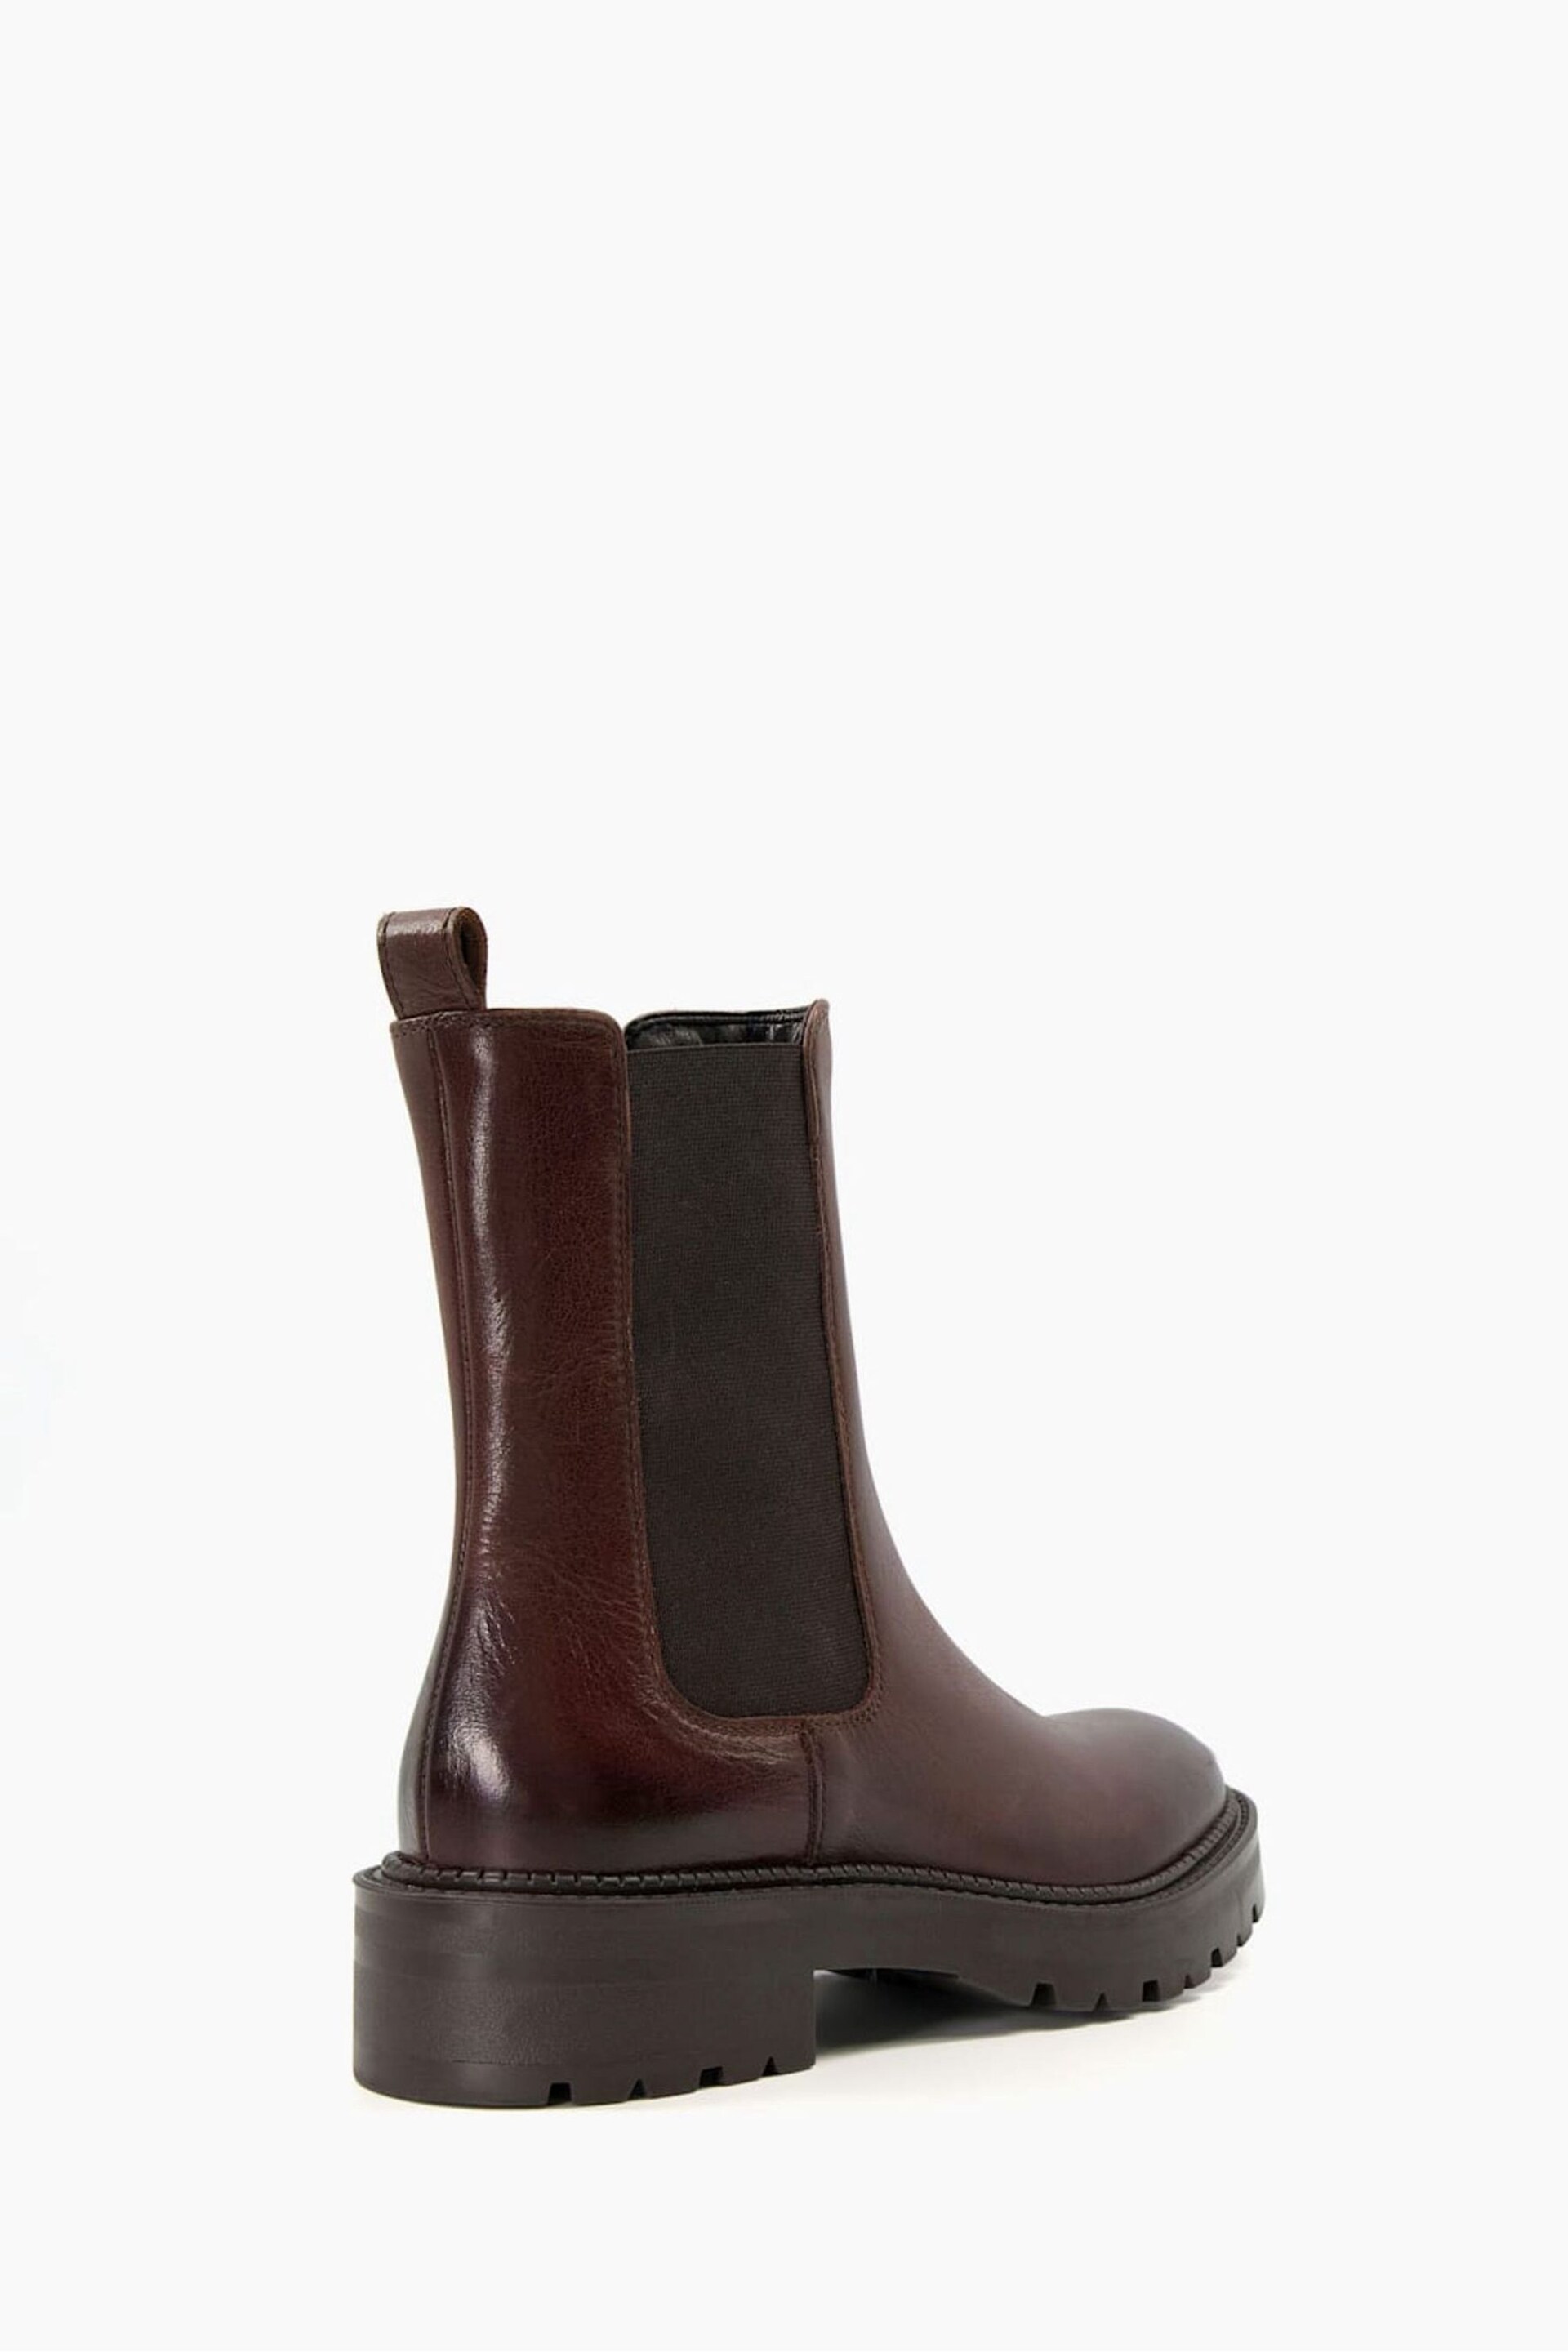 Dune London Brown Picture Boots - Image 4 of 5